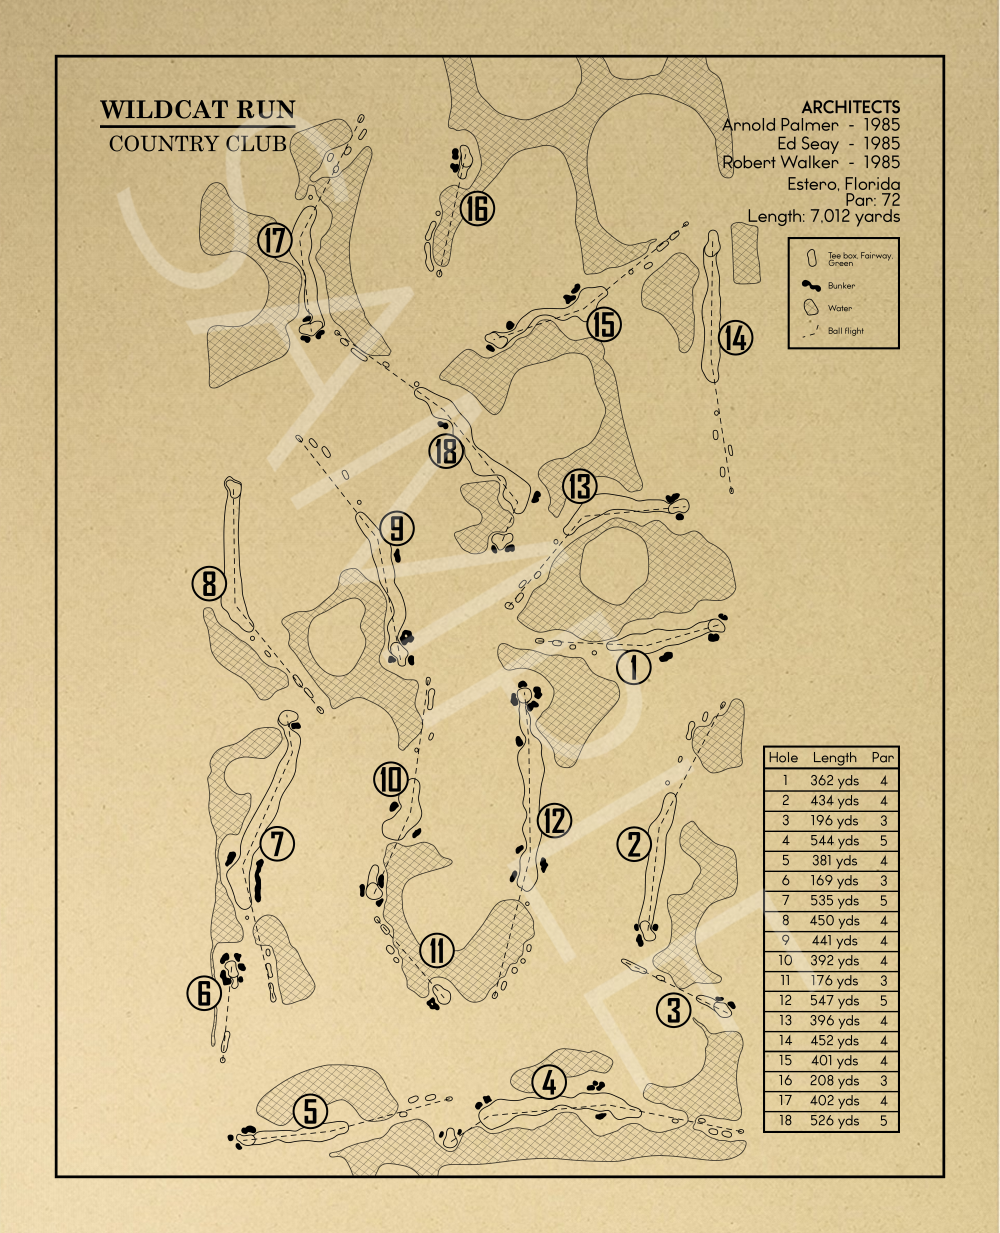 Wildcat Run Country Club Outline (Print)